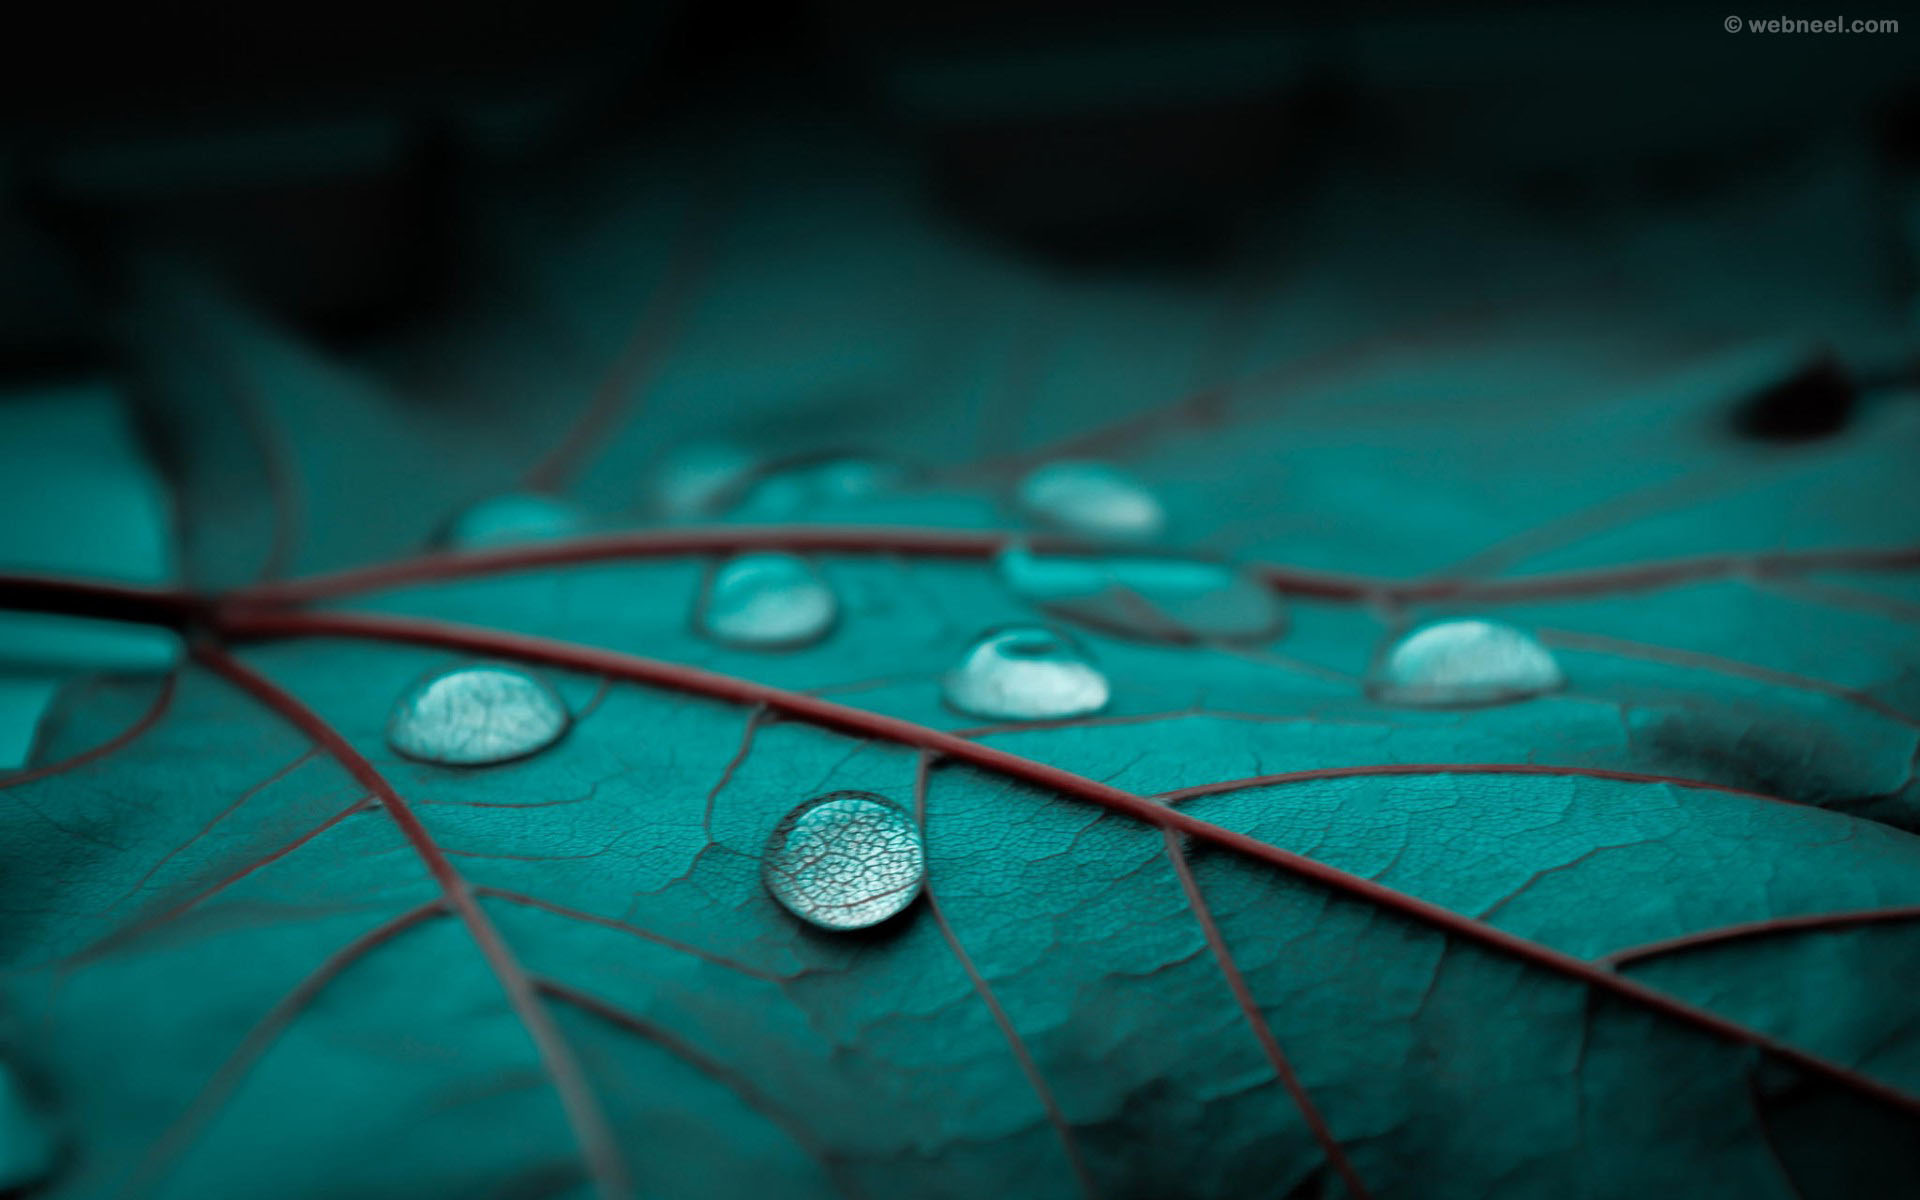 rain wallpaper for mobile,green,water,drop,macro photography,turquoise